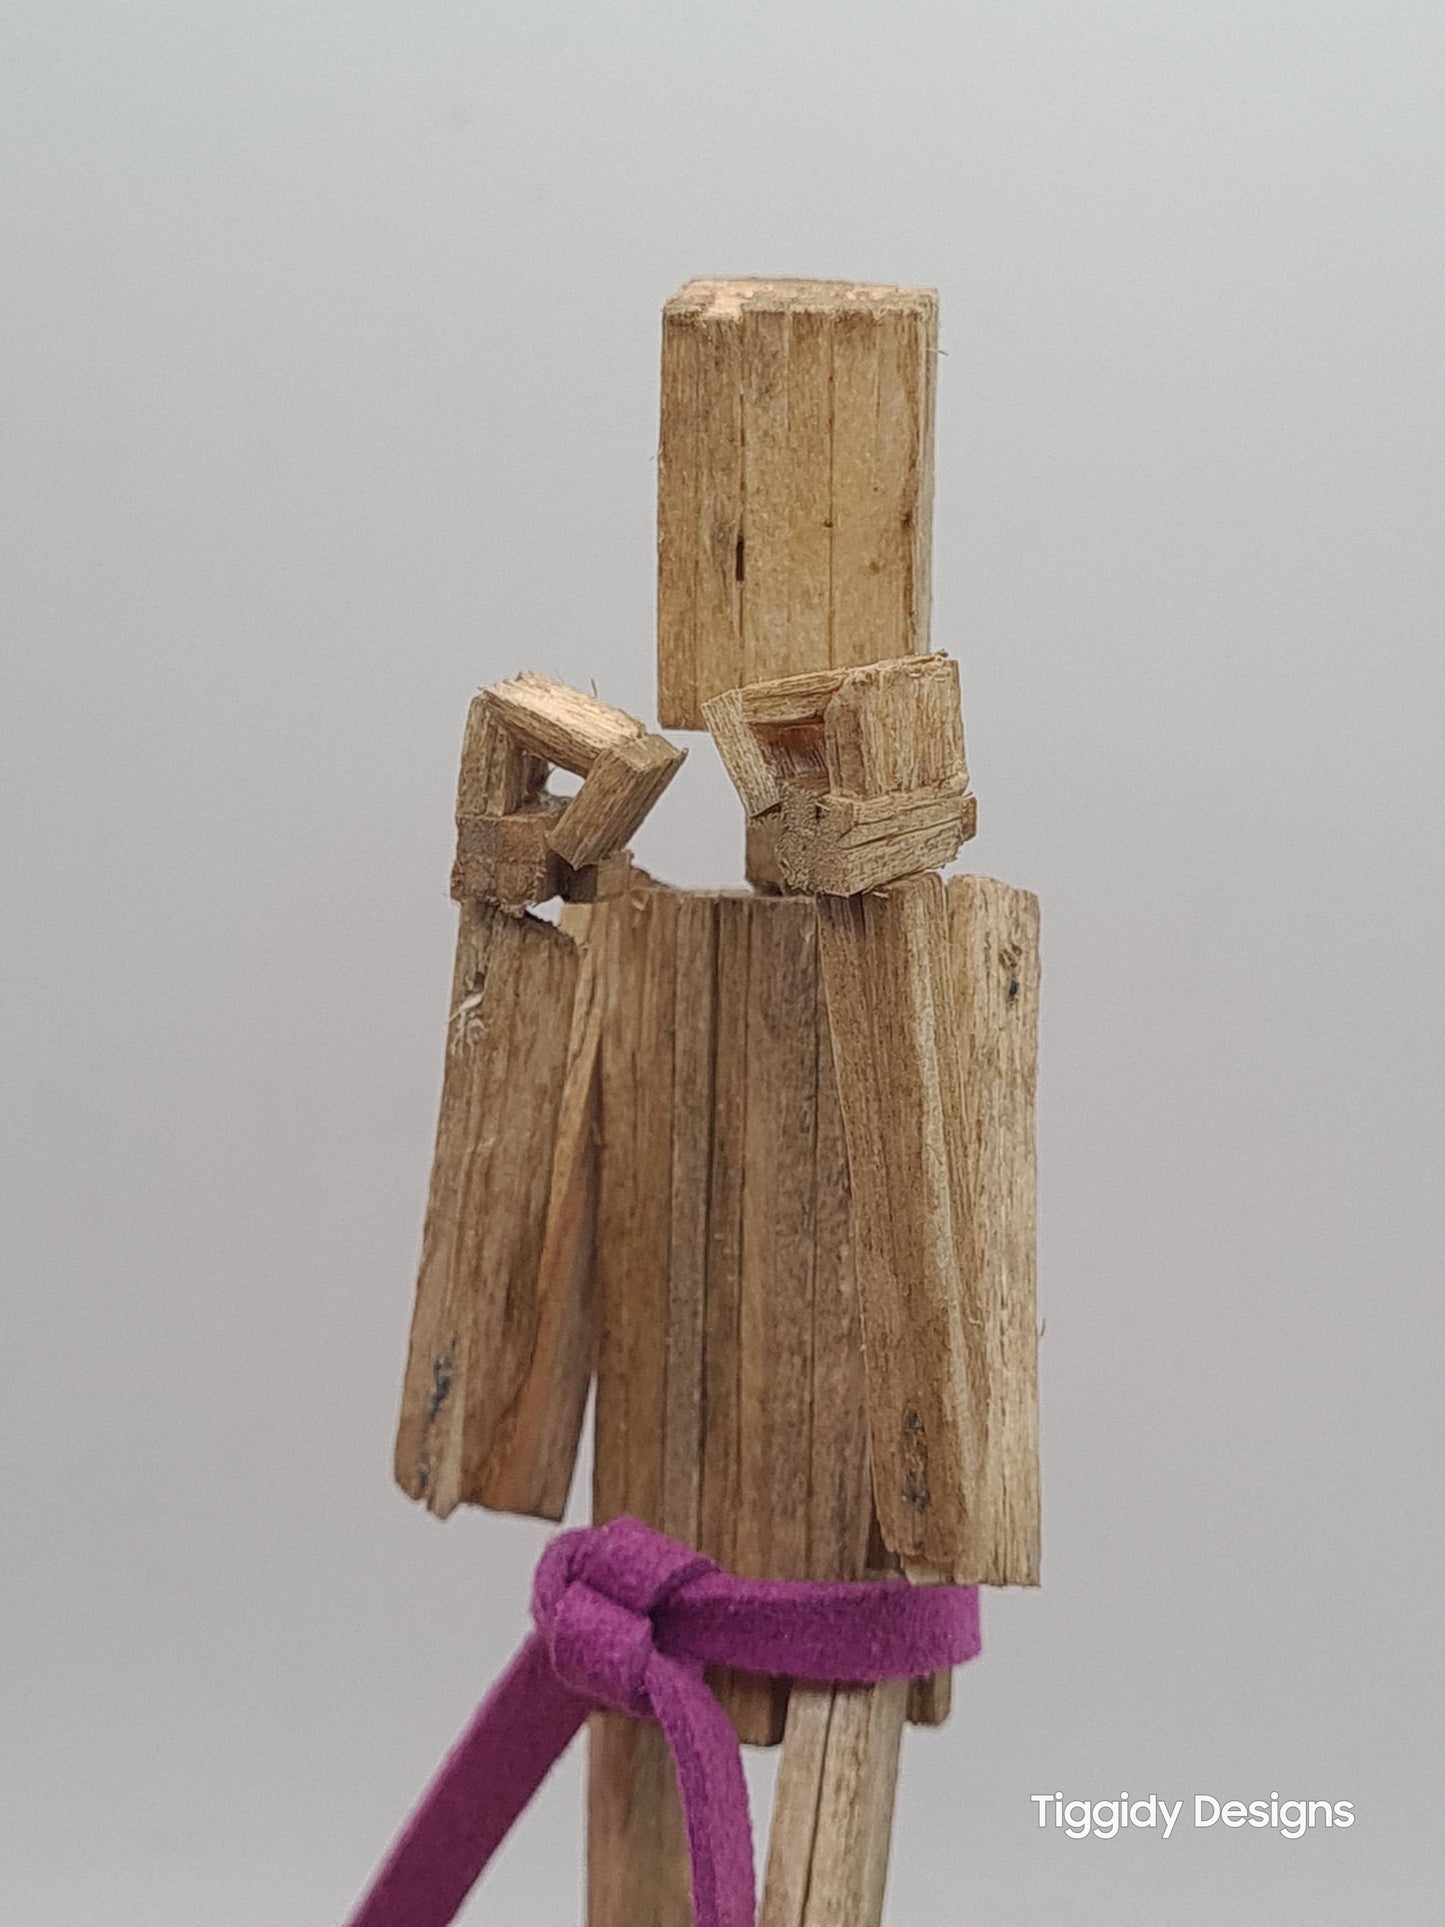 Guard Stance - Handcrafted Wooden Matchstick Figures - Gifts, Ornaments and Decor By Tiggidy Designs